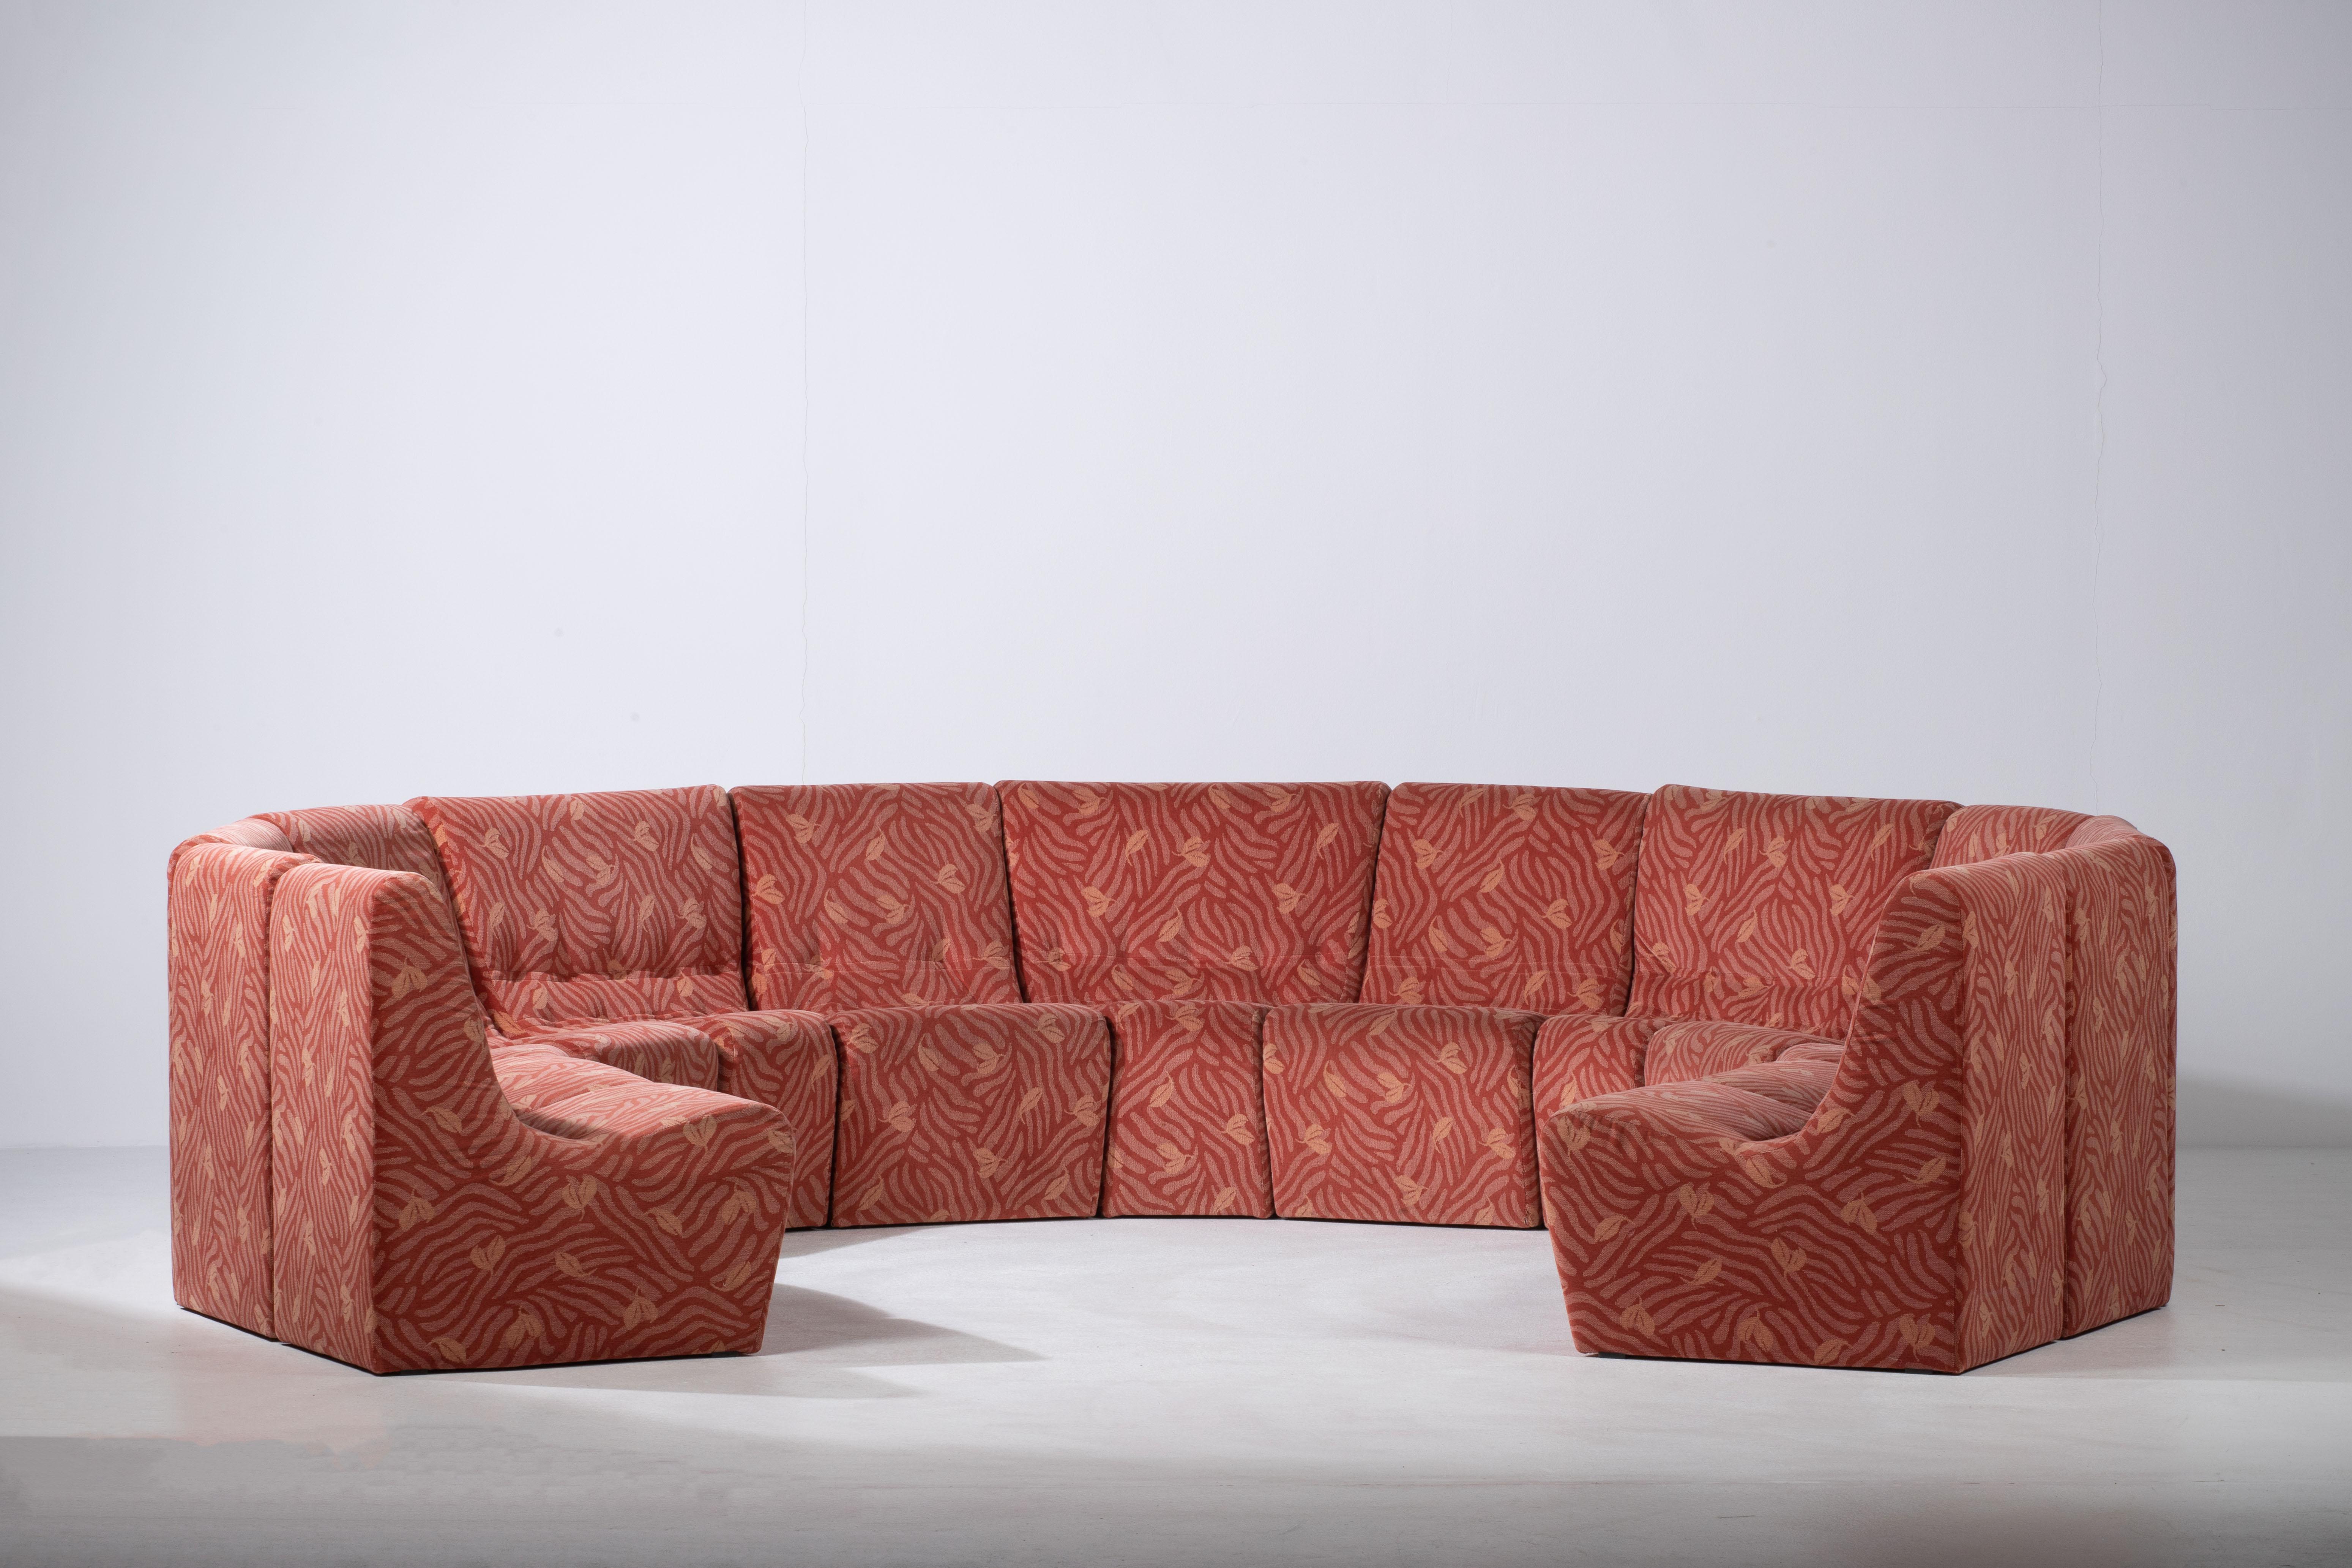 Mid-century modular sofa in a beautiful pink fabric.
Consist of 13 modules of 318 centimeters long when all assembled.
Scandinavian Modular Sofa.
Period: 60s
Materials: Fabric

Good vintage condition with minor wear.
 